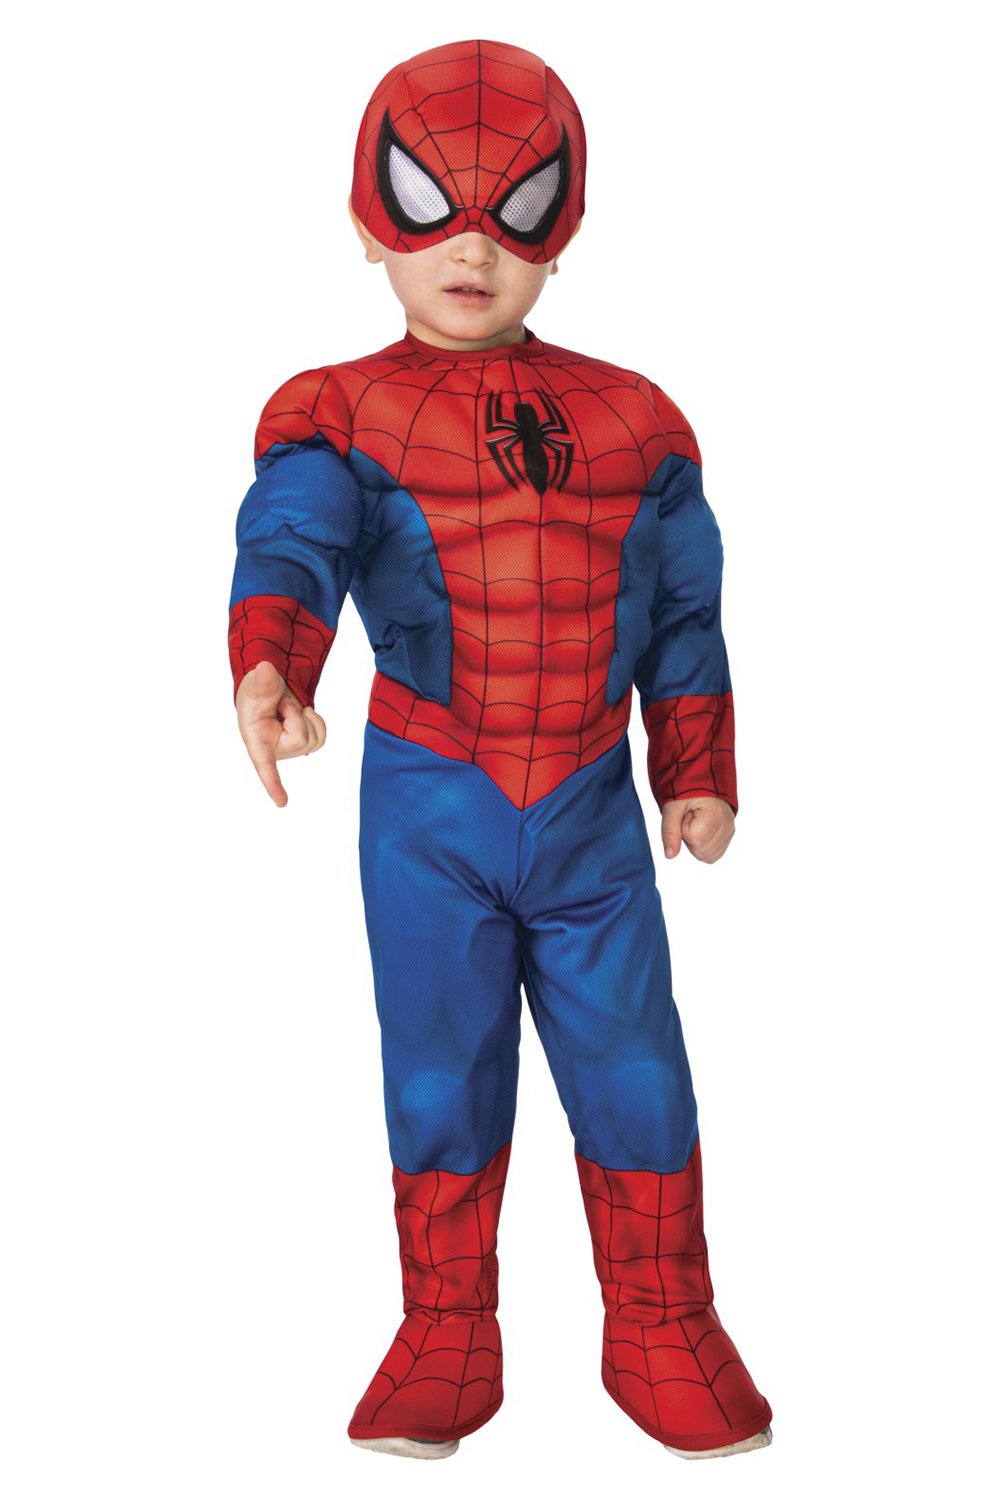 Rubies-Costumes-Marvel-Spider-Man-Baby/Toddler-Costume